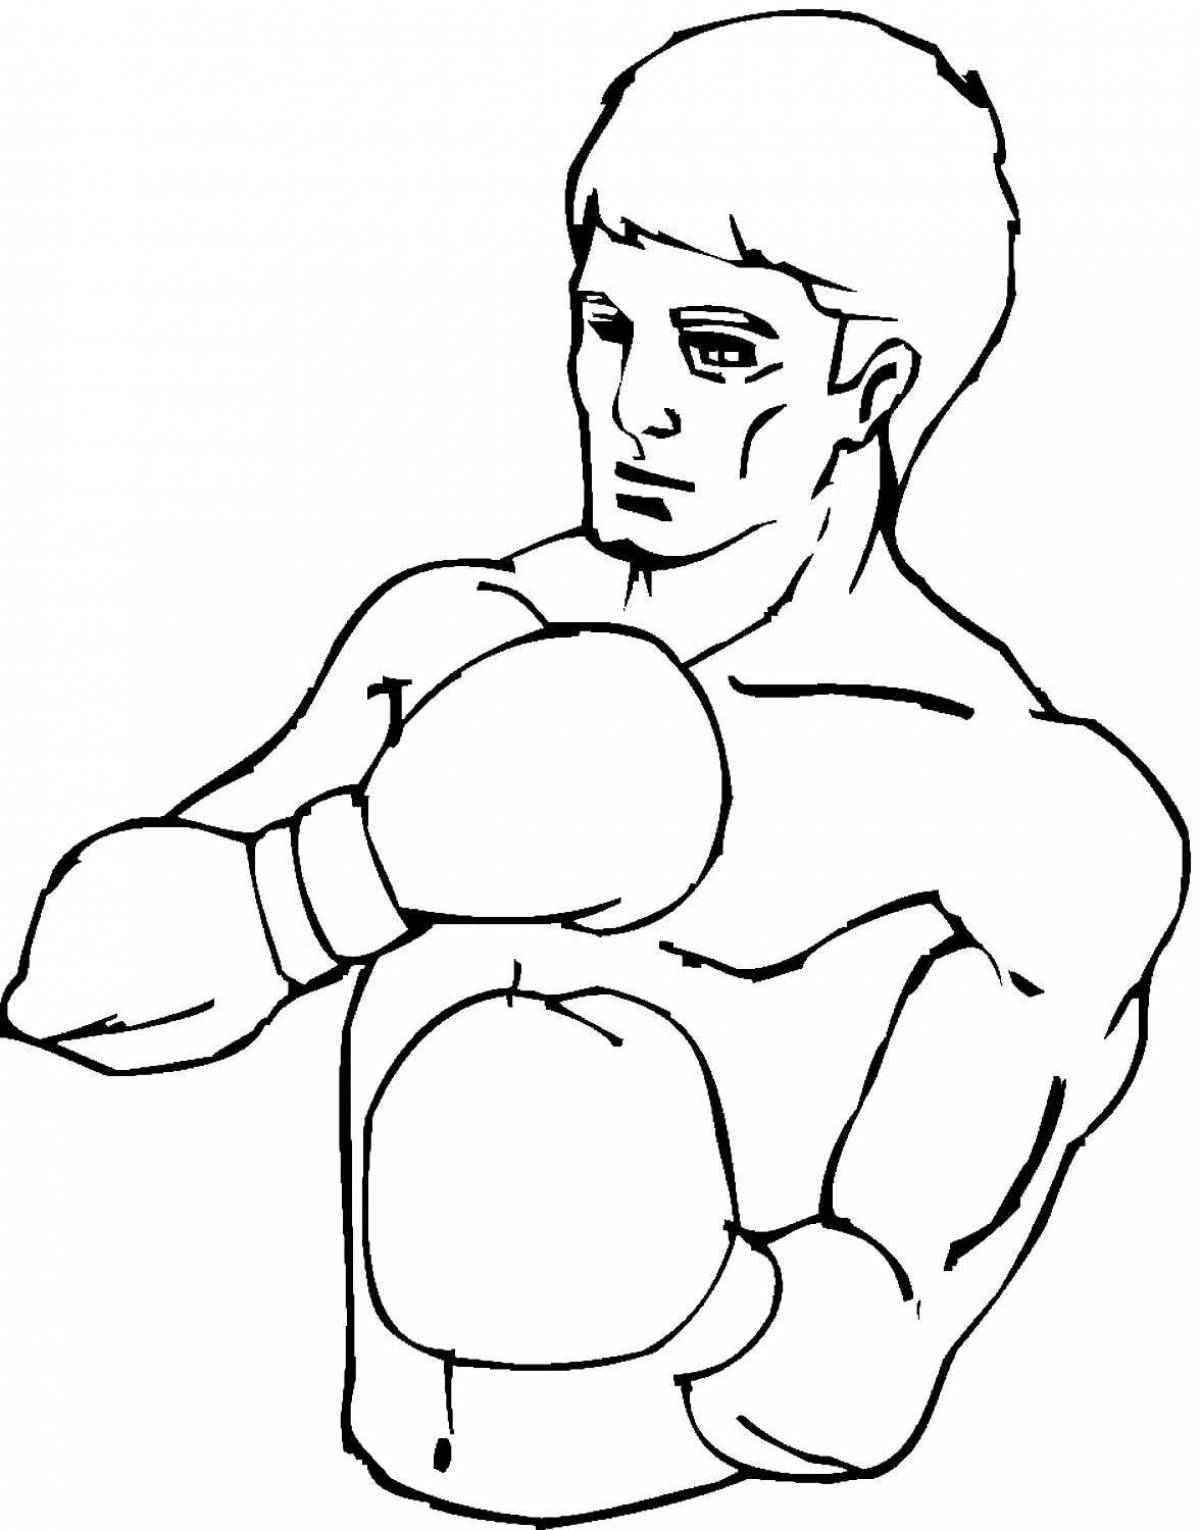 Colorful boxing coloring book for kids